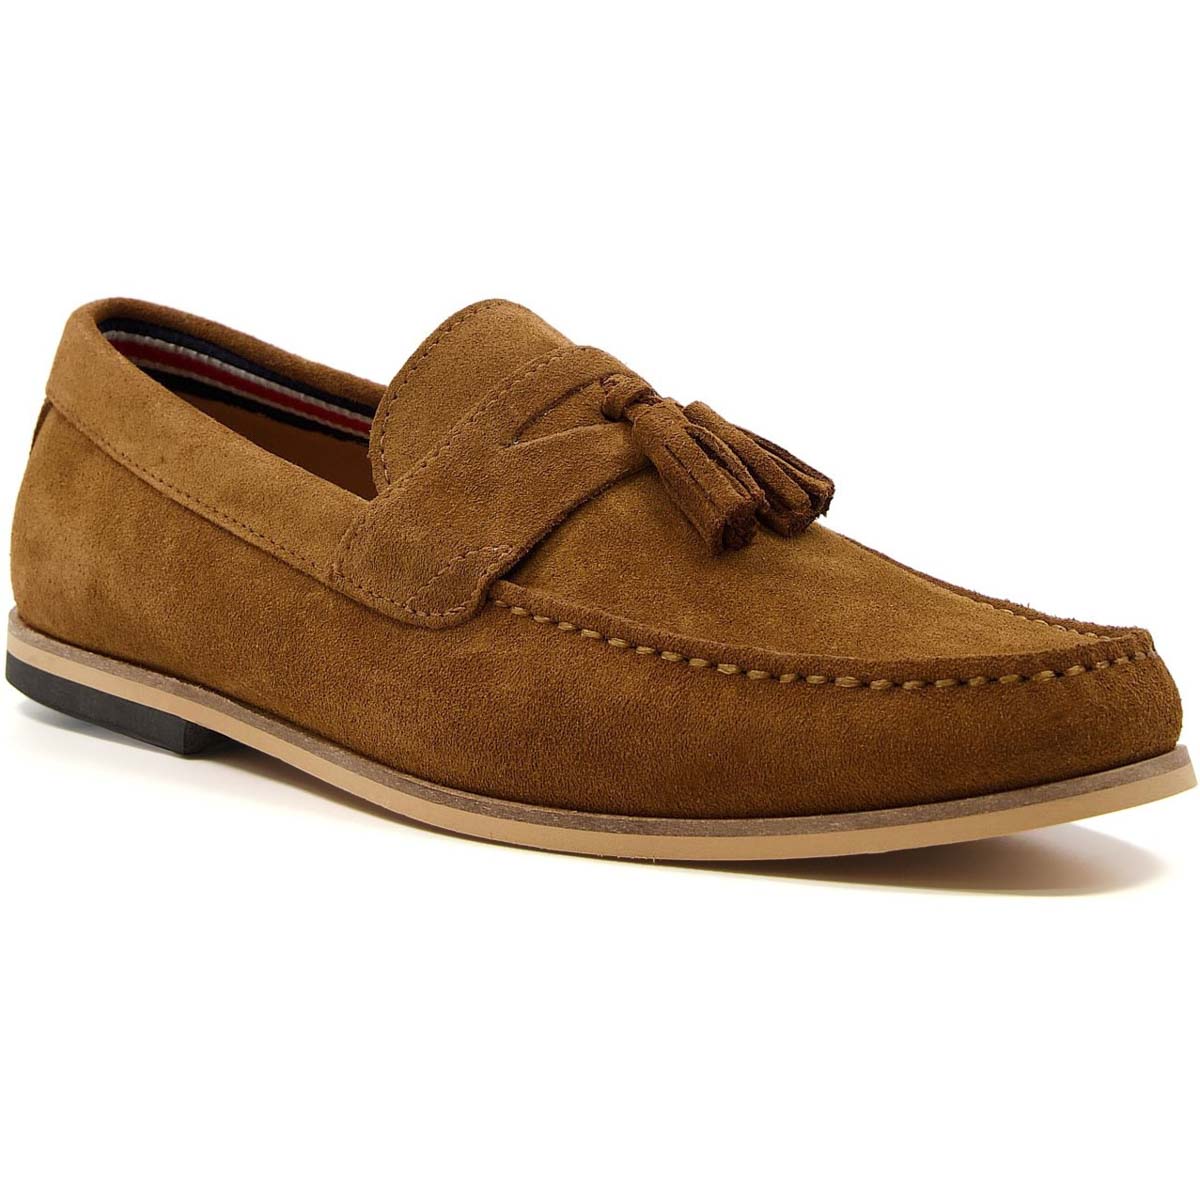 Dune London Bart Tan Mens Slip-on Shoes 2745063800083 in a Plain Leather in Size 12